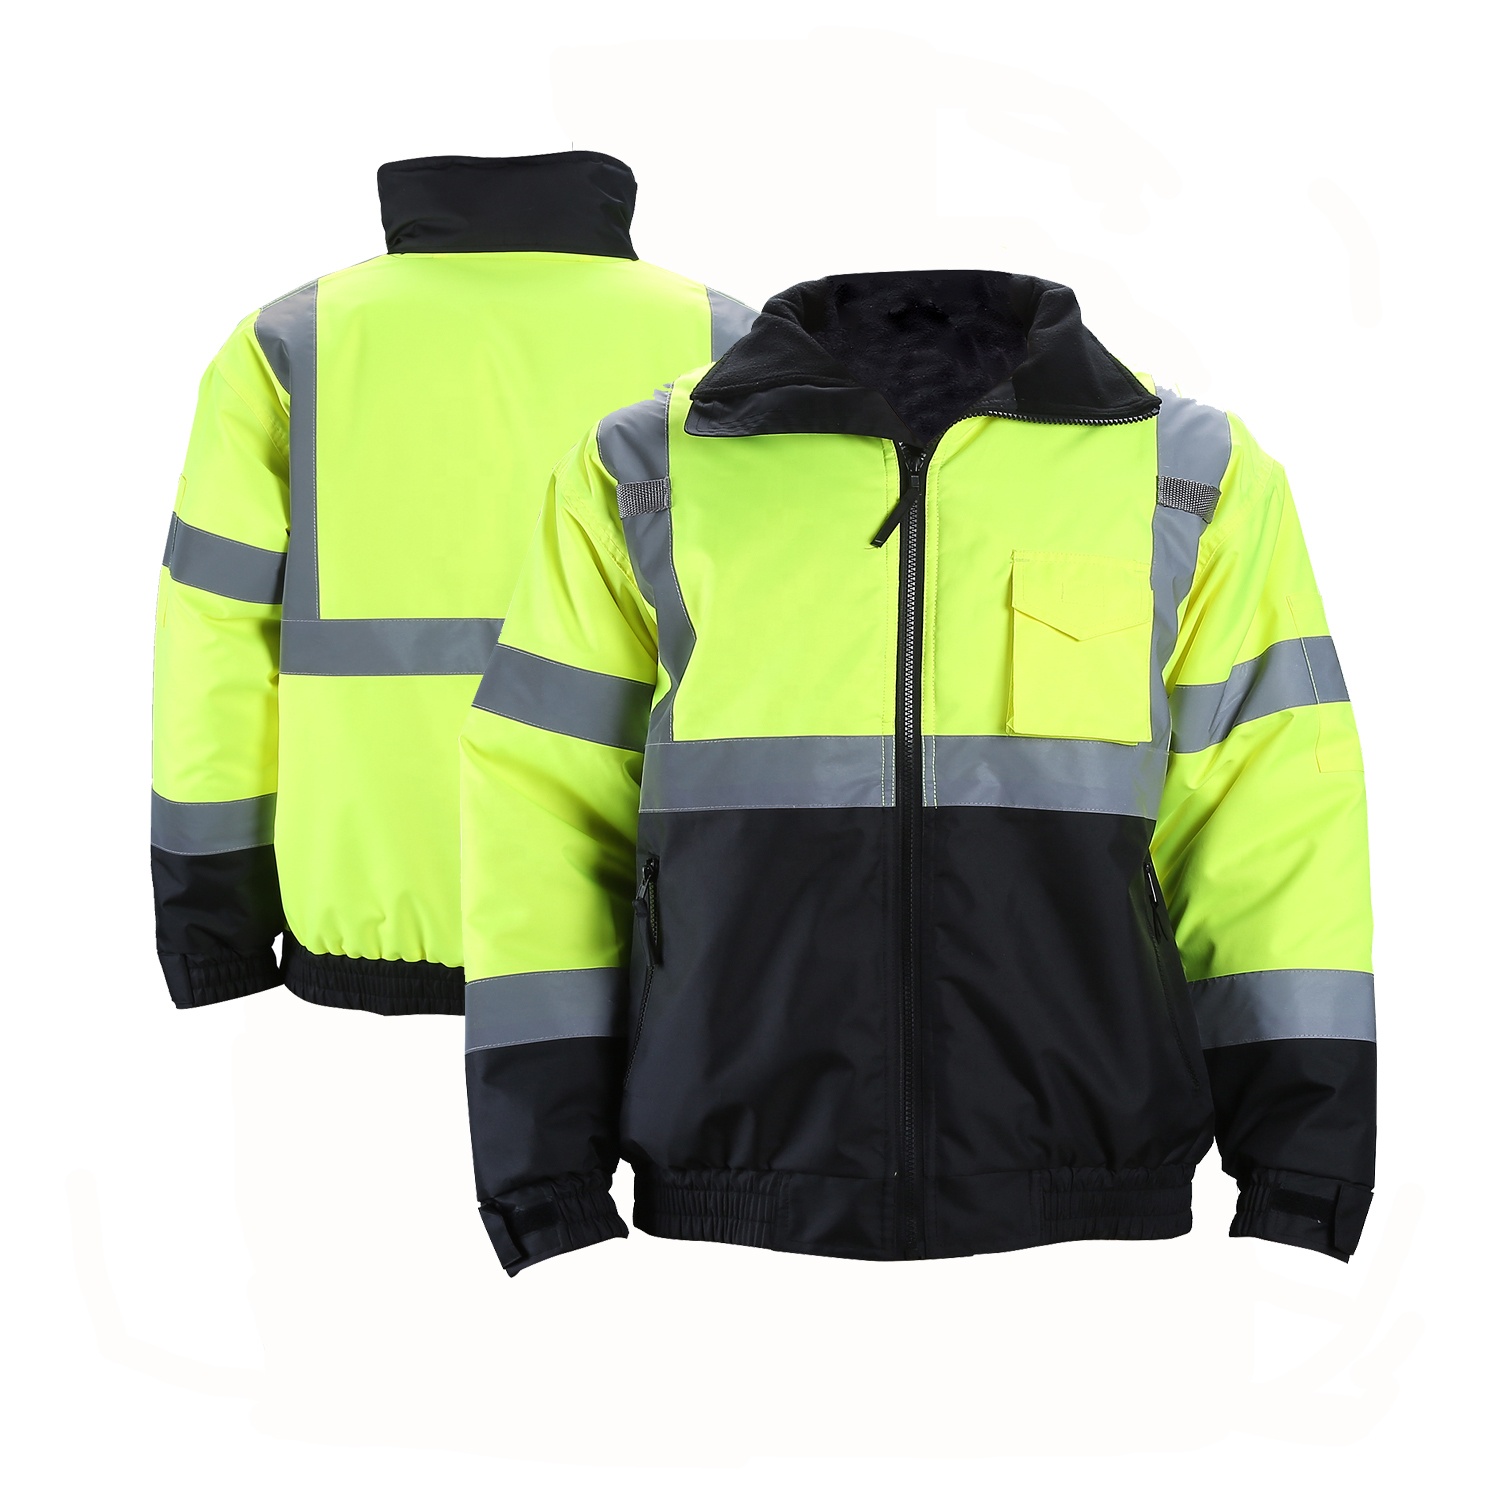 Wholesale Class 3 Type R Safety Reflective Jacket